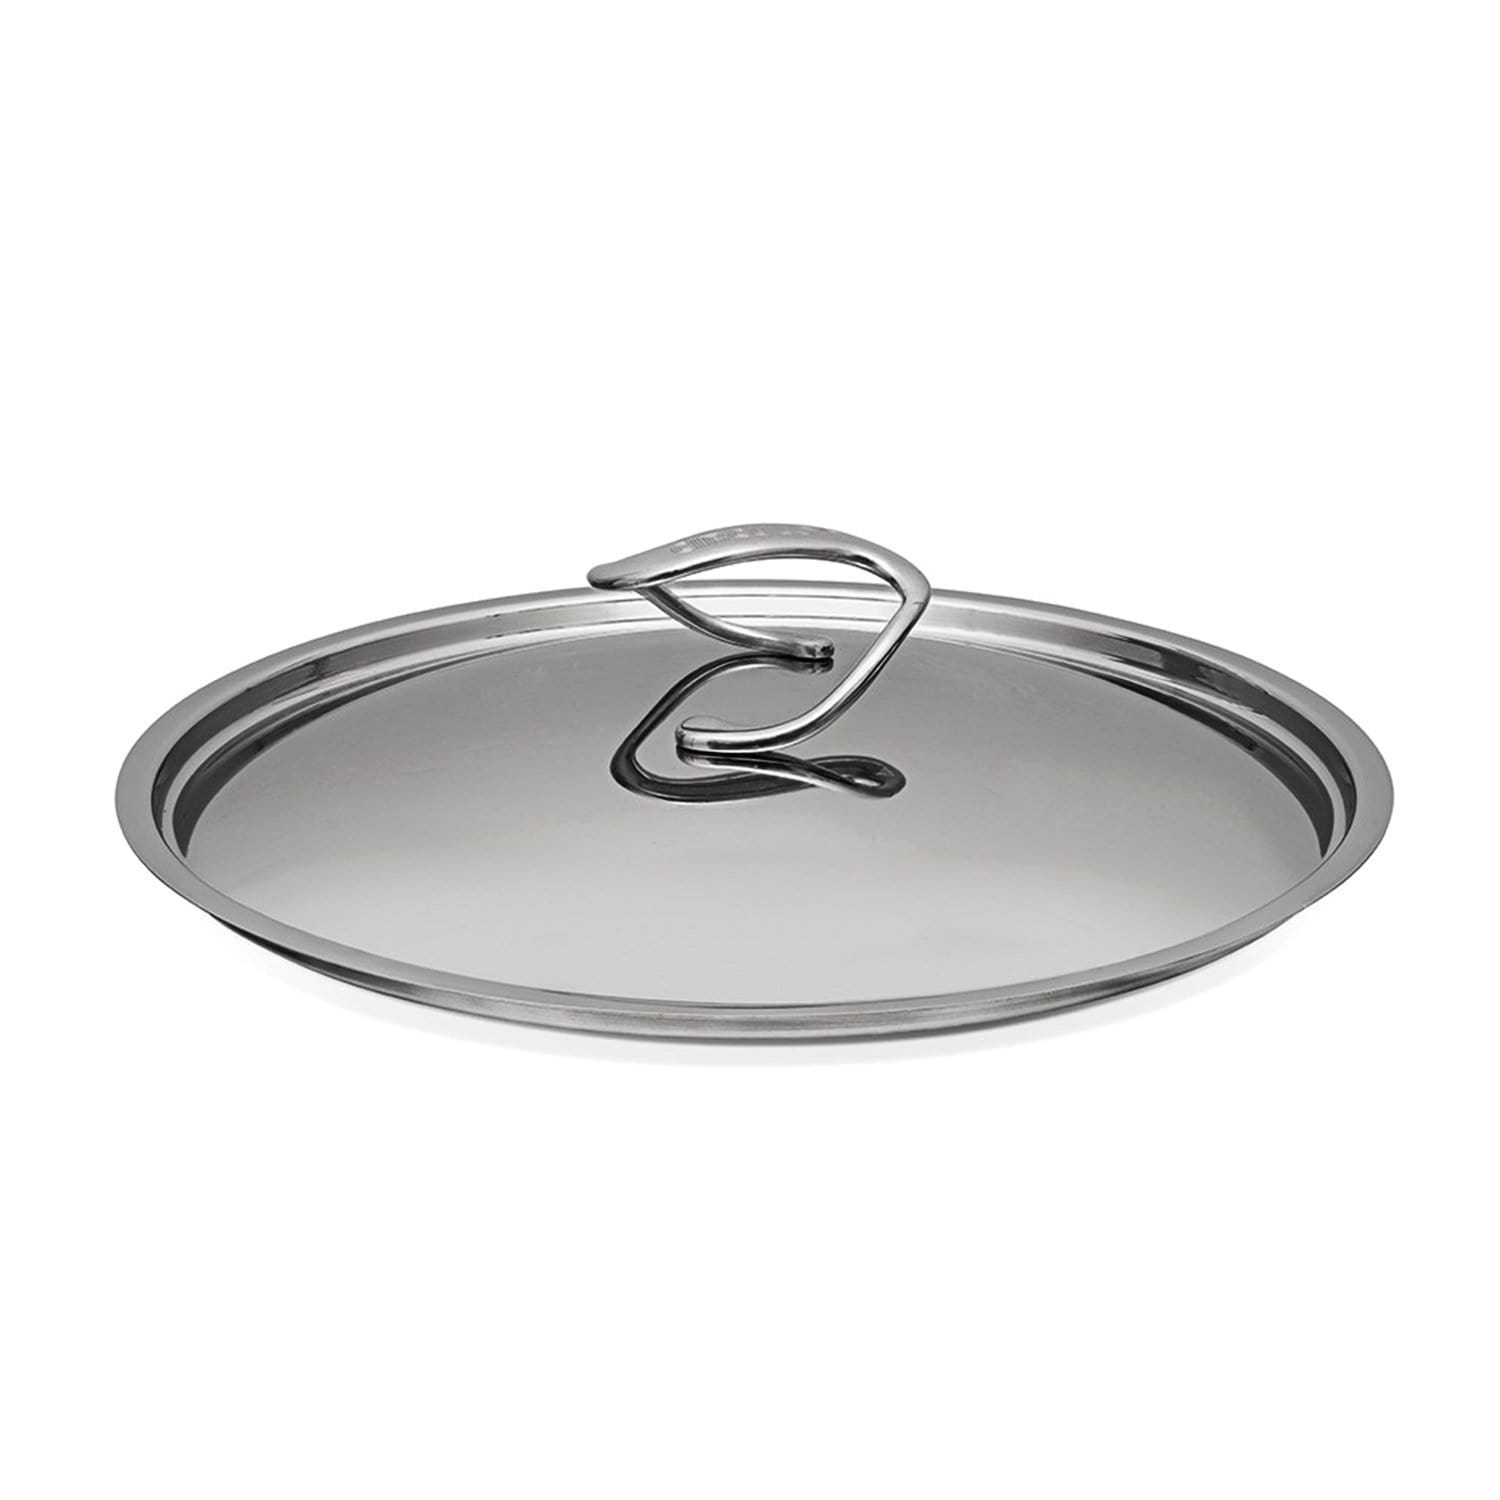 Circulon Style Casserole with Lid - 24 cm - 88007 - Jashanmal Home